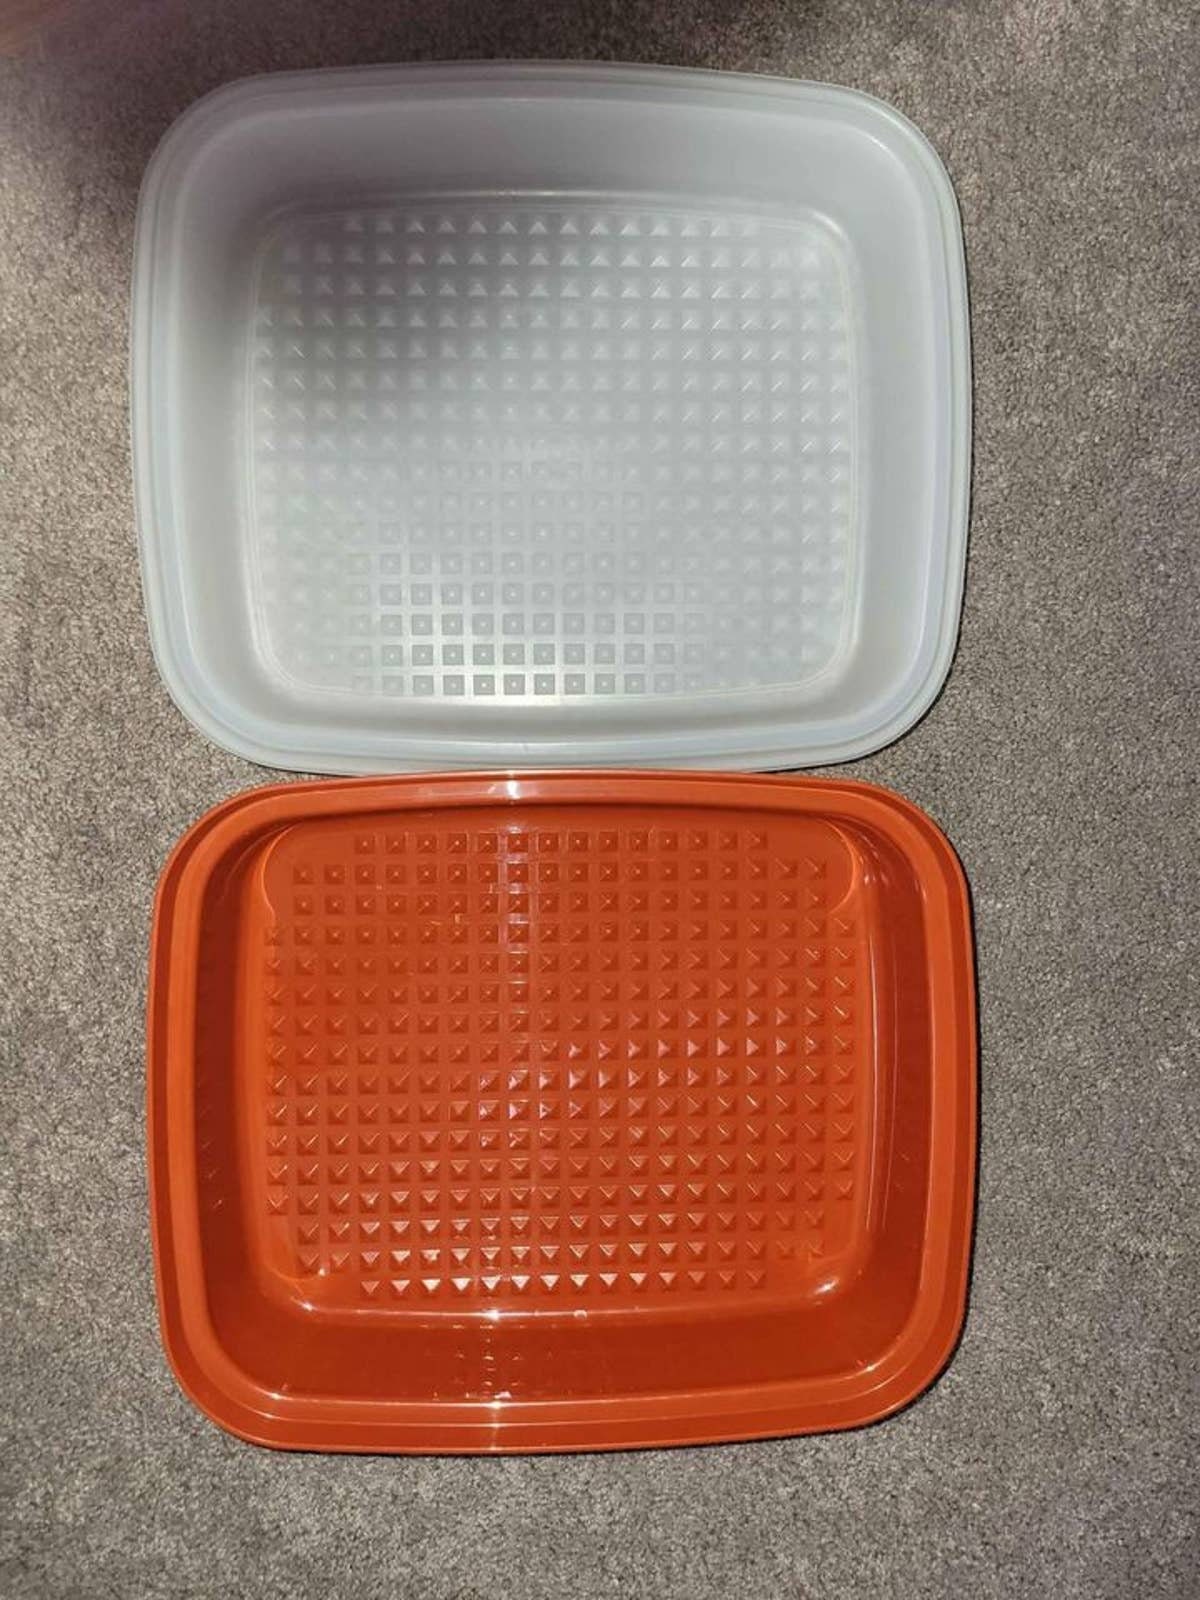 Tupperware 1294-8 Meat Marinade Container. Red Bottom. Made In USA. 12x10